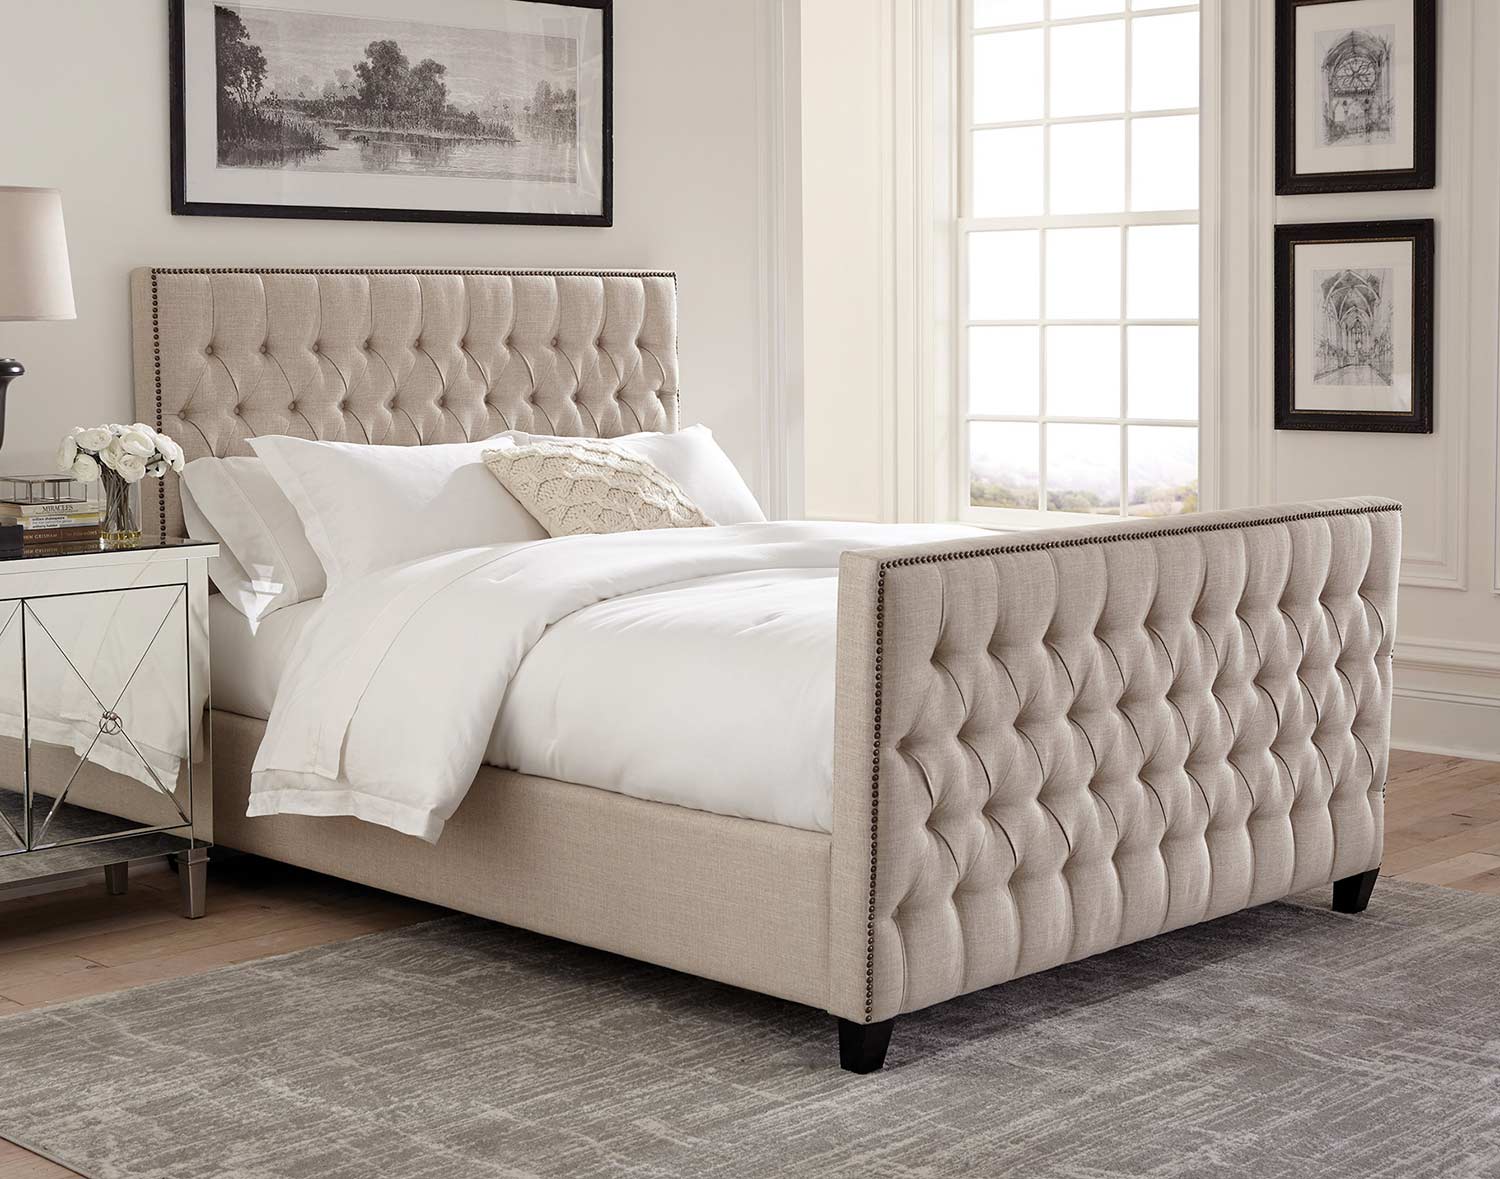 Coaster Saratoga Bed - Oatmeal 300714-Bed at Homelement.com